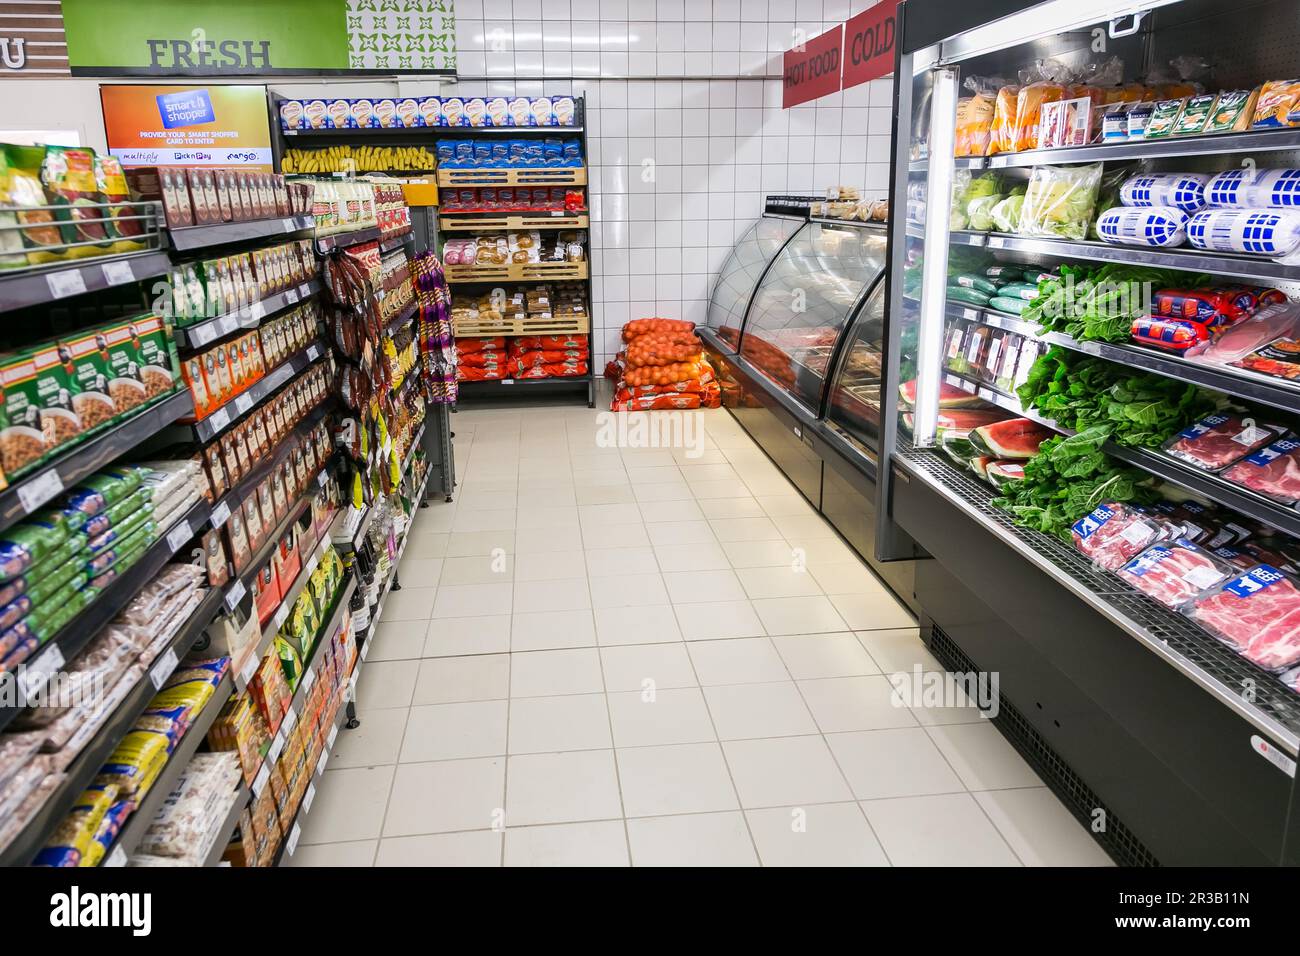 Fully stocked shelves of food and household items at local Pick n Pay grocery store Stock Photo